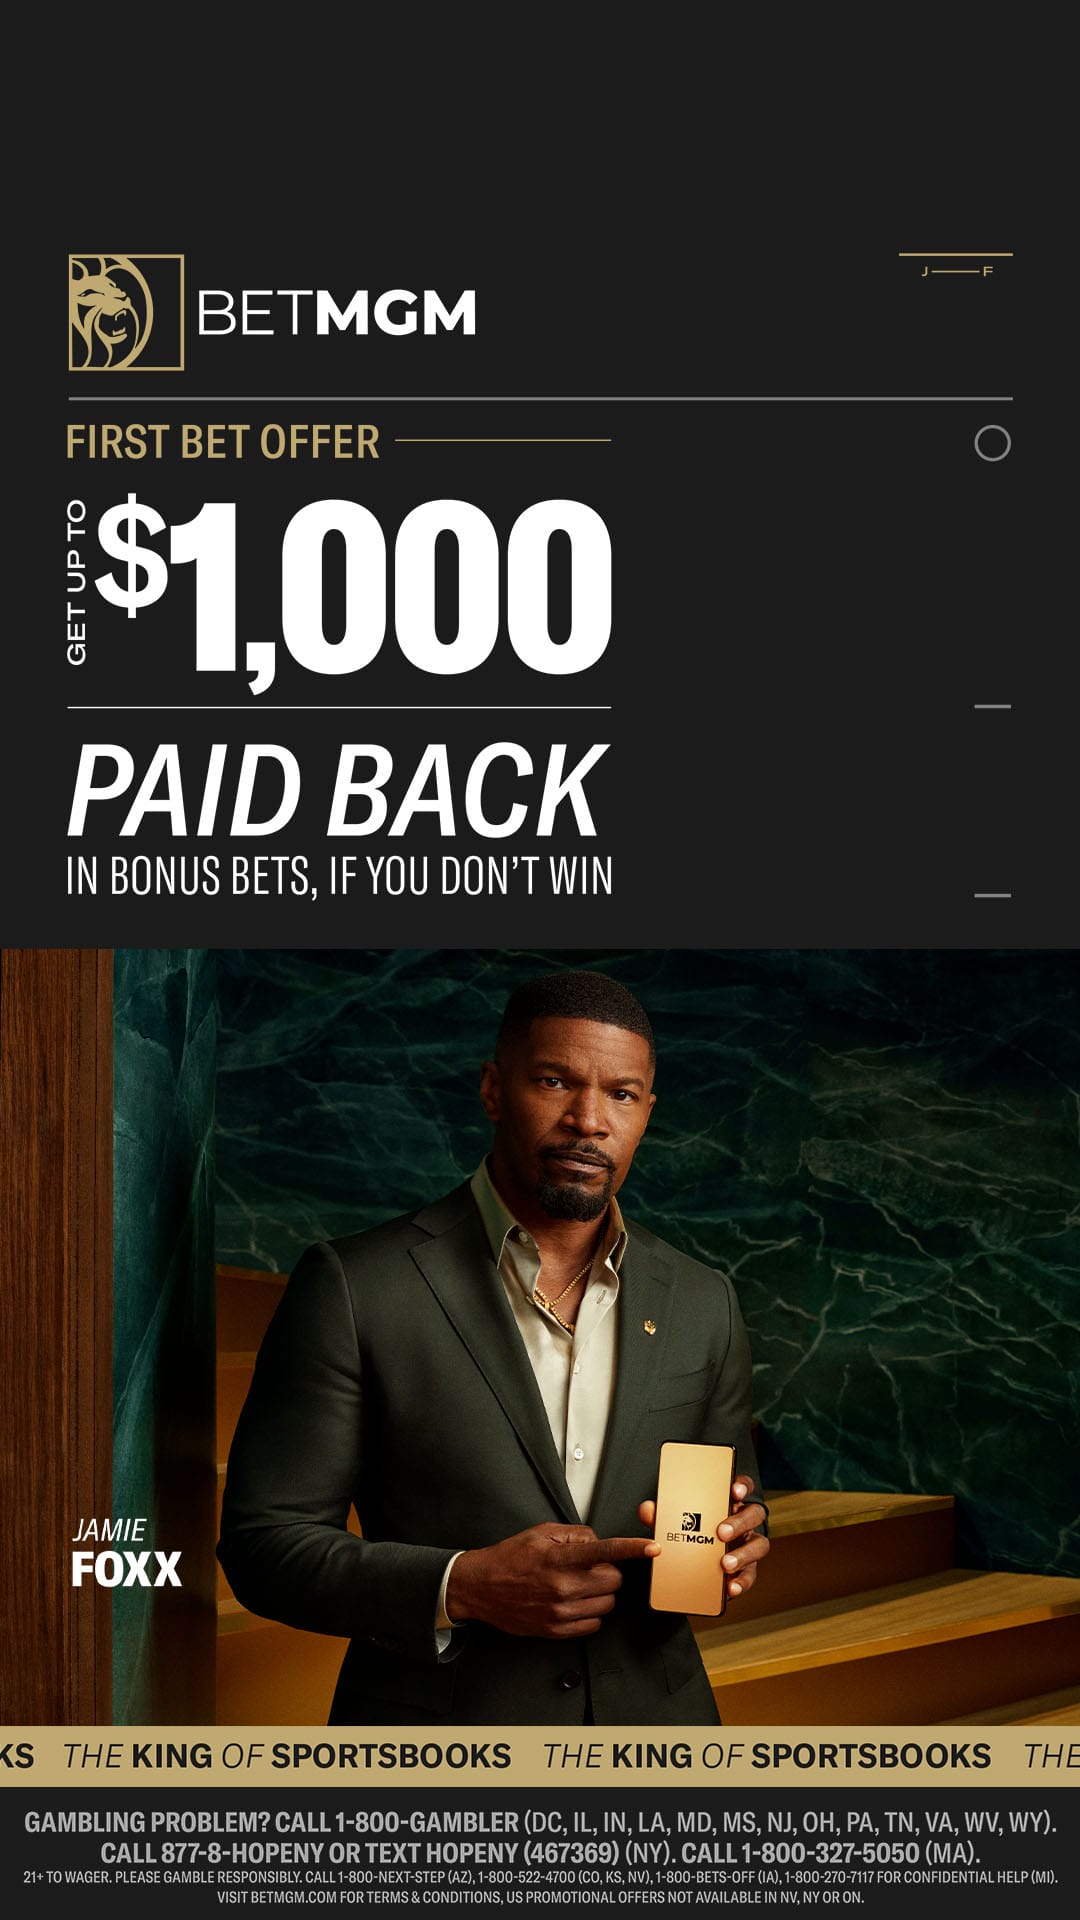 Actor Jamie Foxx on the Welcome Offer BetMGM's banner.